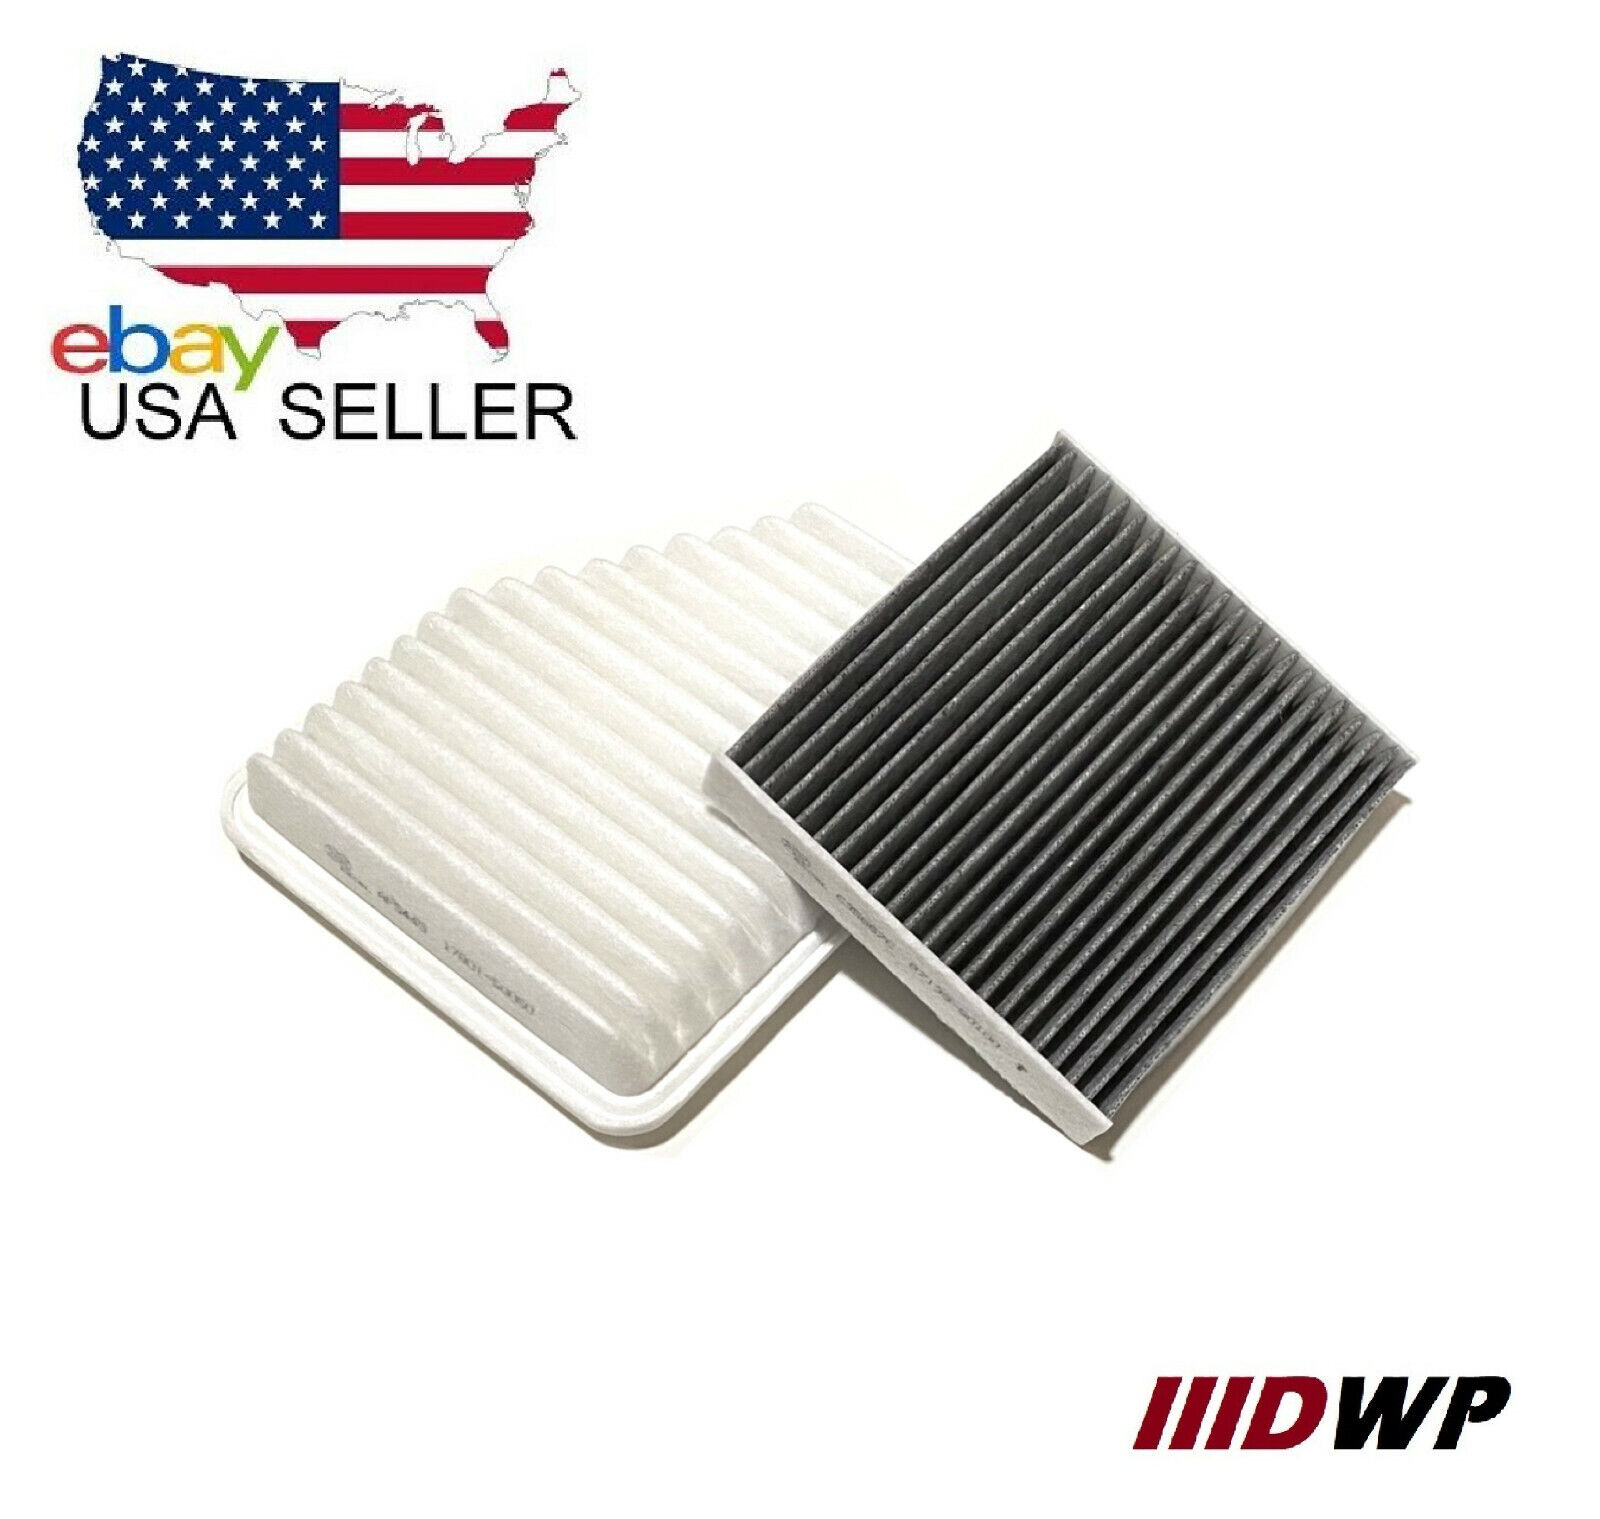 ENGINE AIR FILTER + CHARCOAL CABIN FILTER FOR LEXUS 2006 GS300 2007- 2011 GS450h